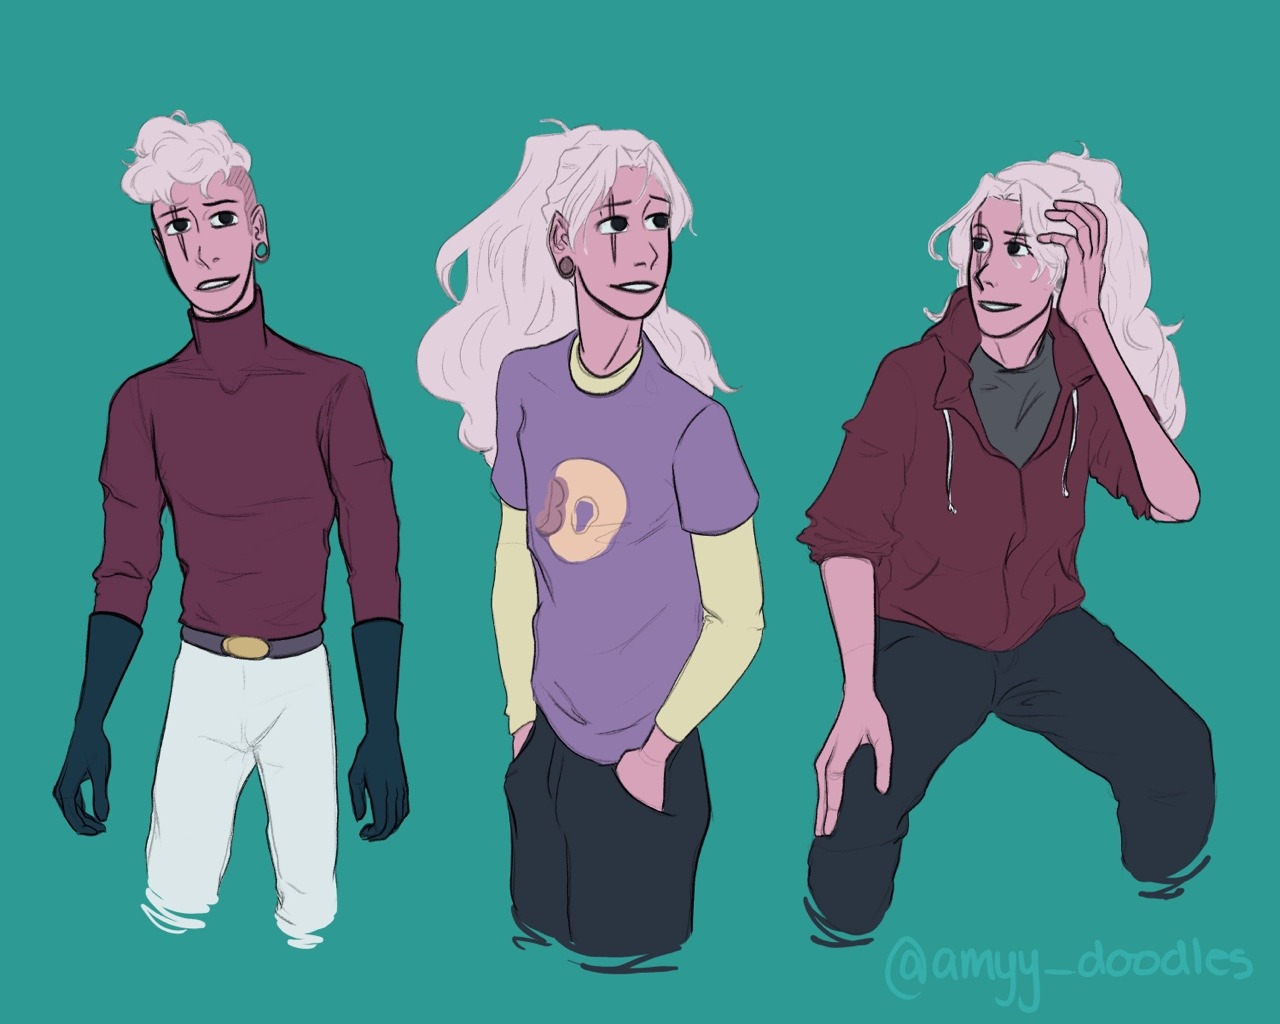 Just caught up on all the Steven Universe episodes and am obsessed with the idea of Lars growing out his hair because it would be amazing✨